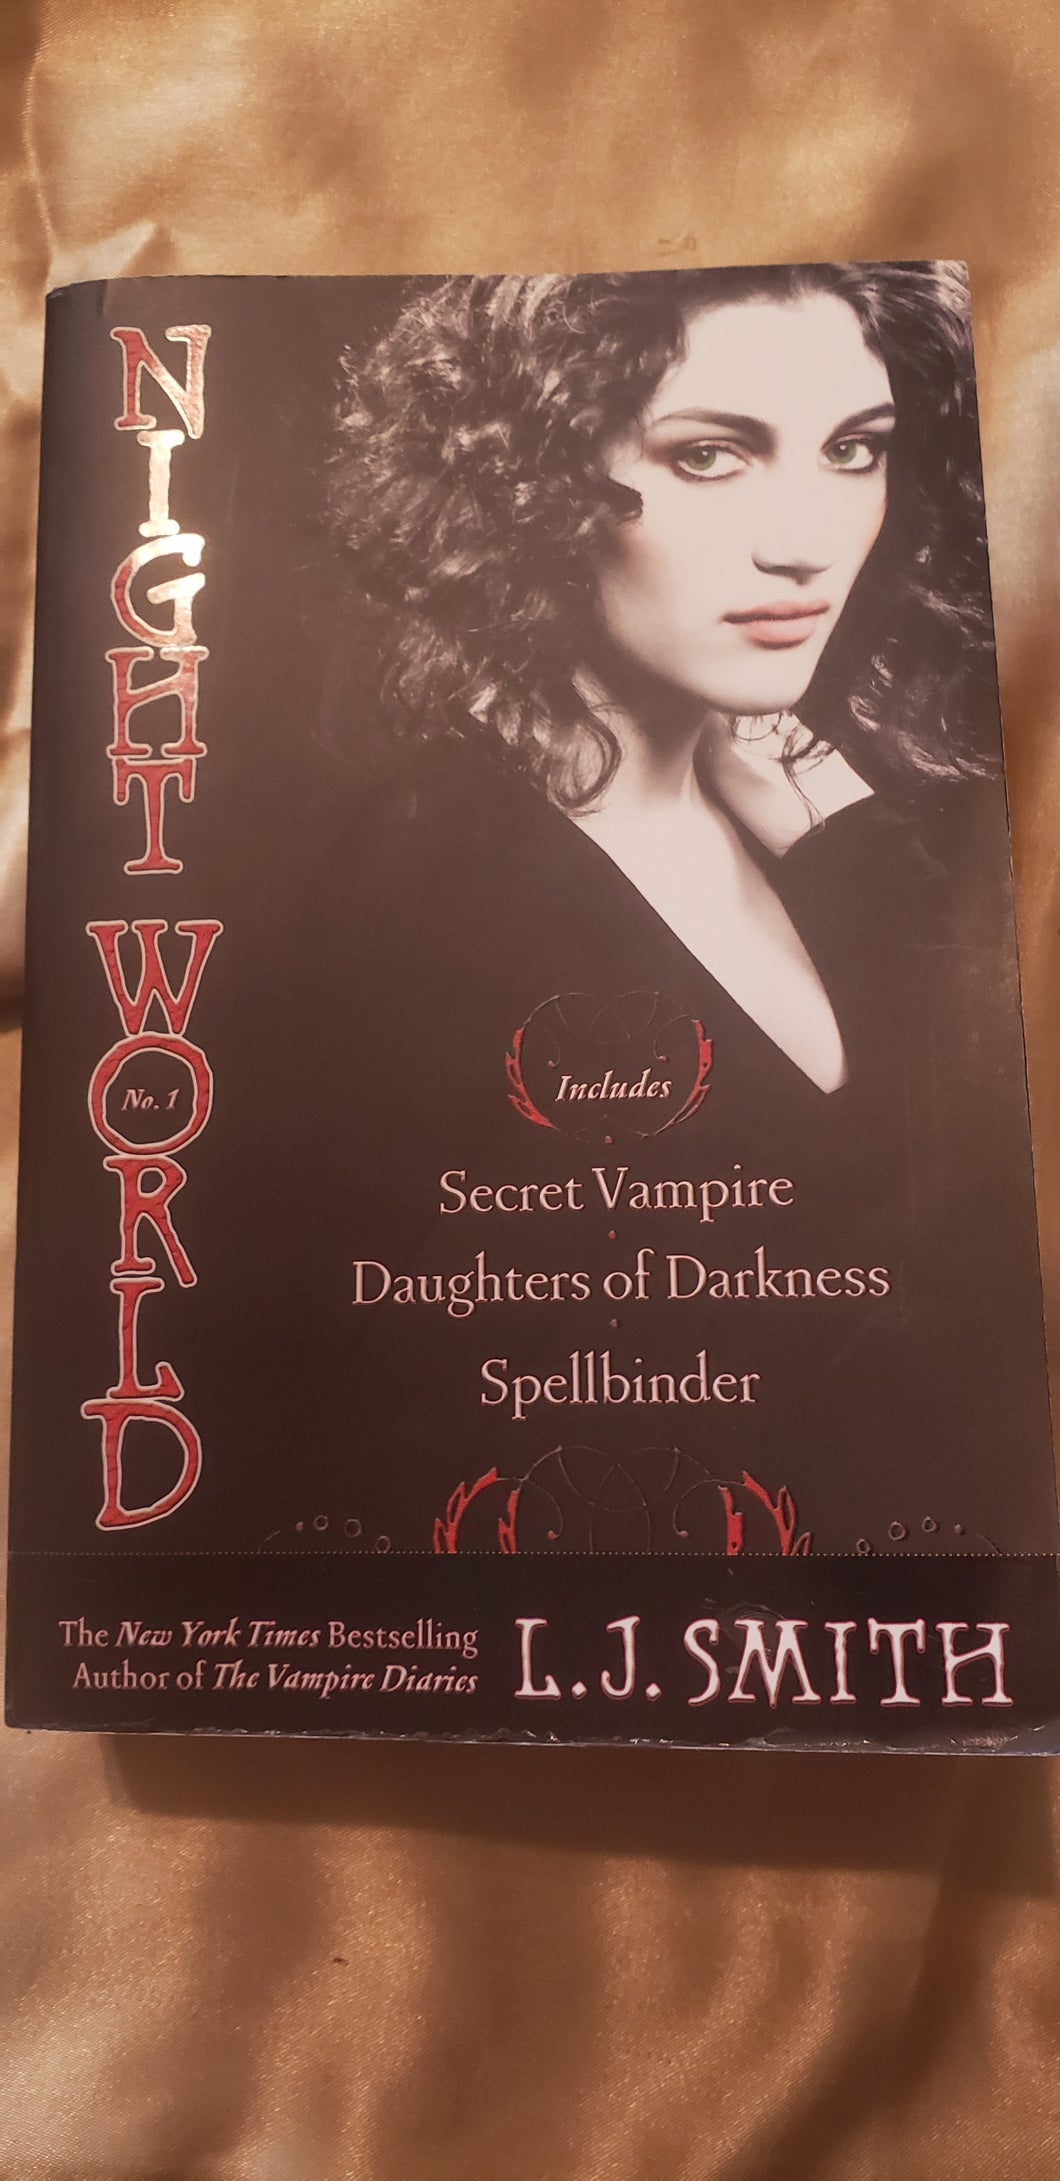 Night World No. 1 by L.J. Smith includes Secret Vampire, Daughters of Darkness and Spellbinder